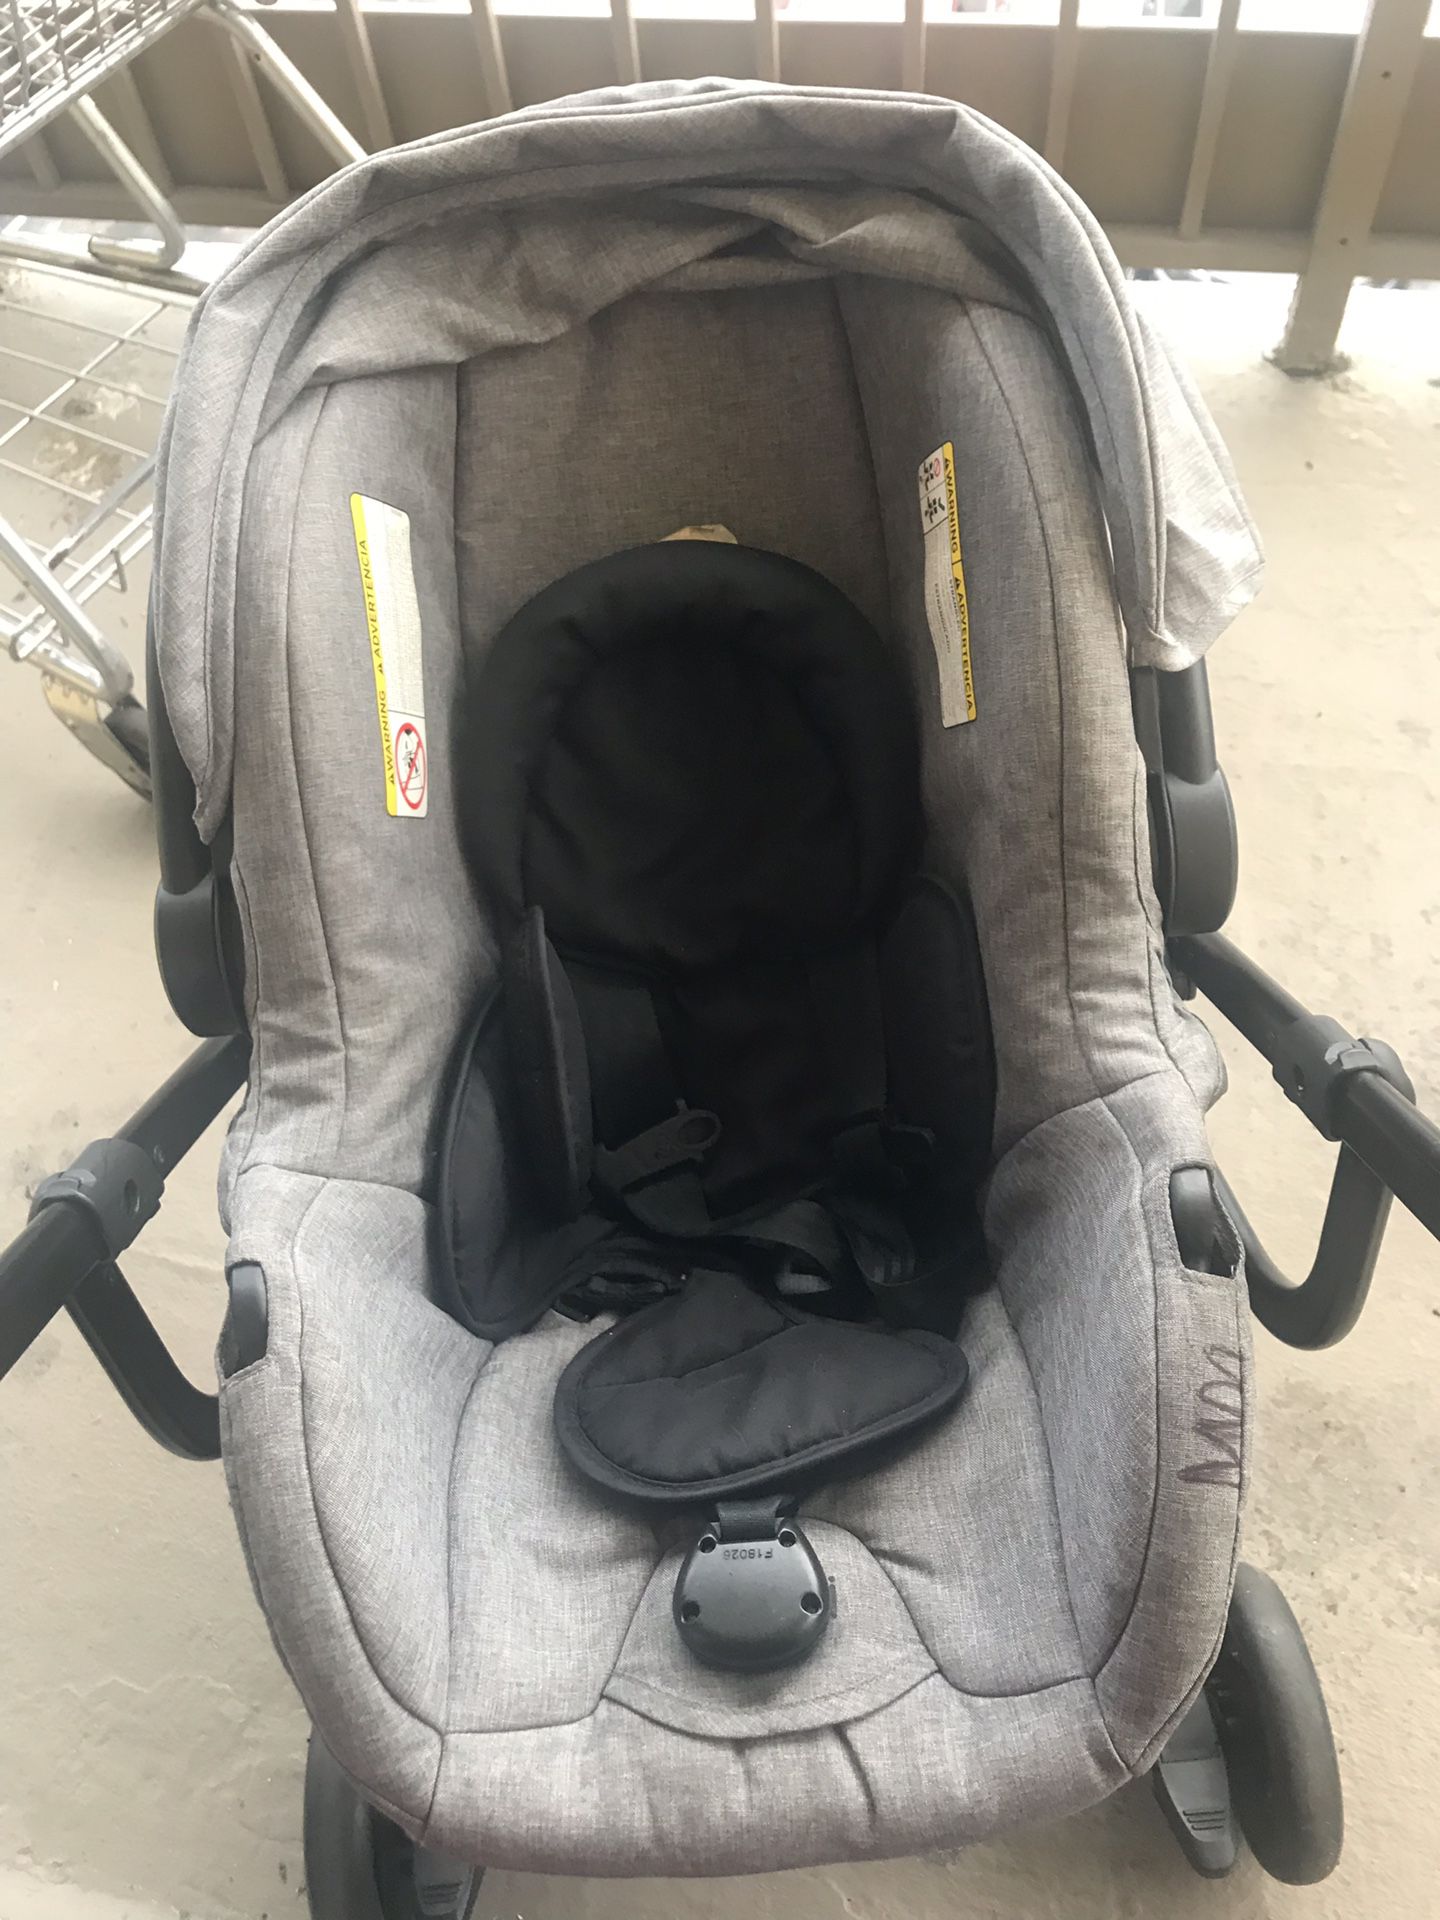 Urbini car seat,troller with base. I’m selling it because I need a double stroller